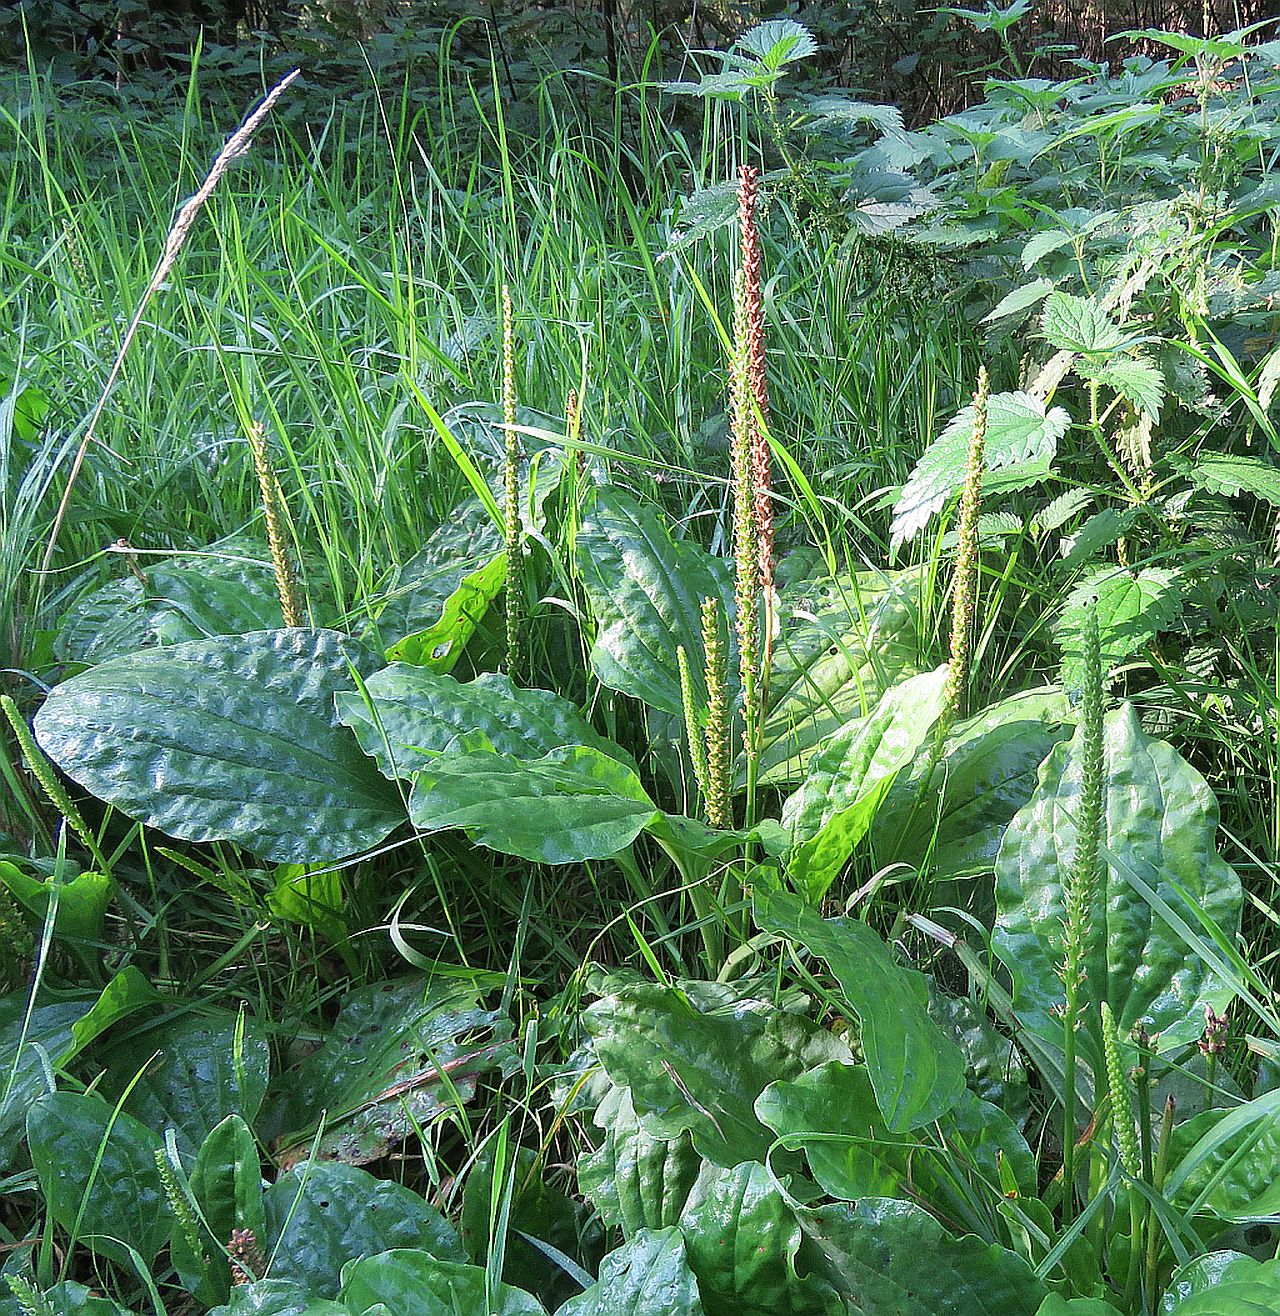  Greater plantain